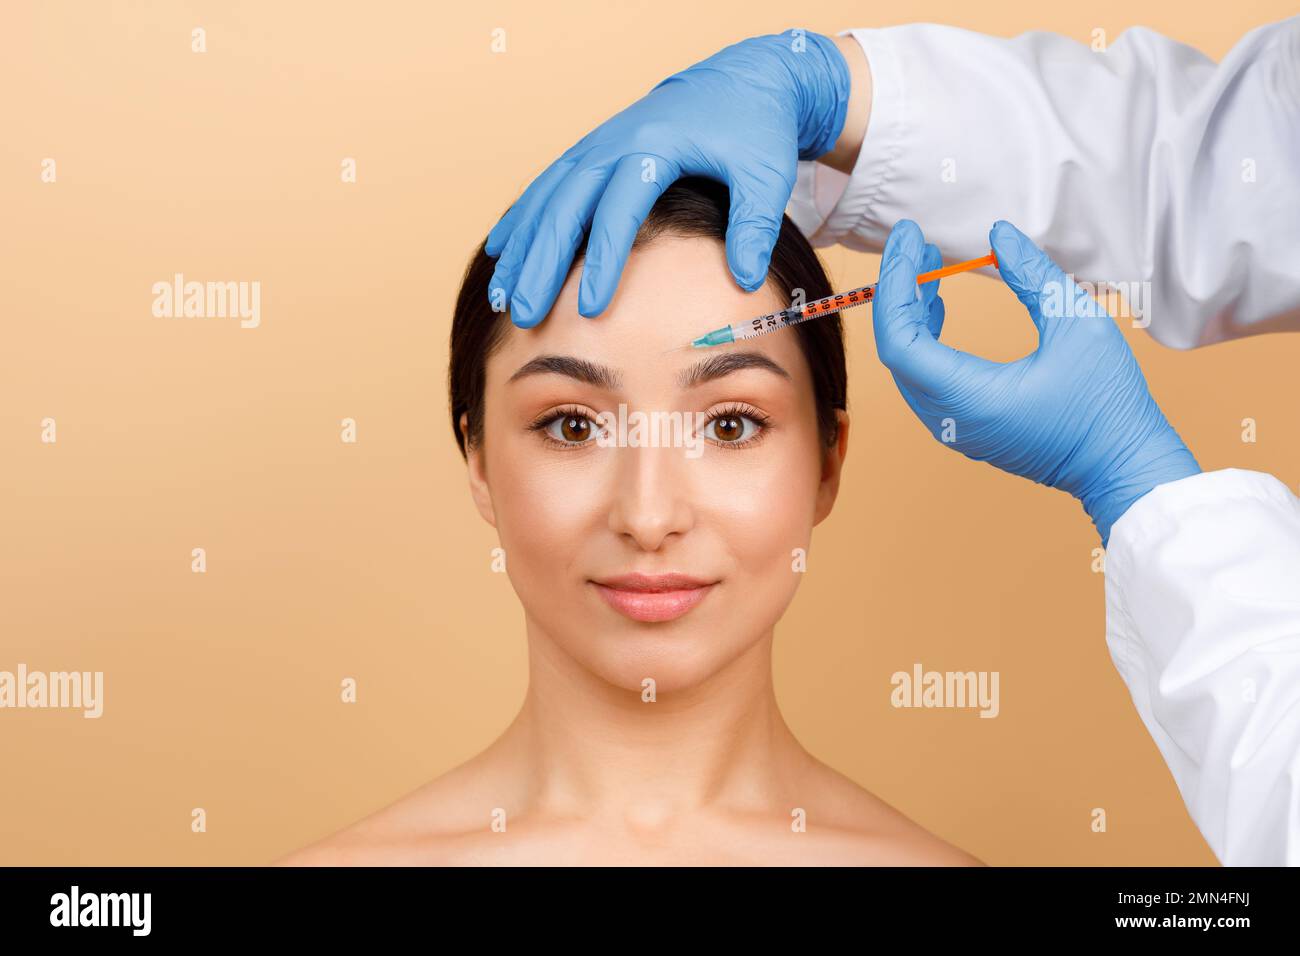 Cosmetologist Doctor Making Botox Injection In Interbrow Zone To Young Indian Woman Stock Photo